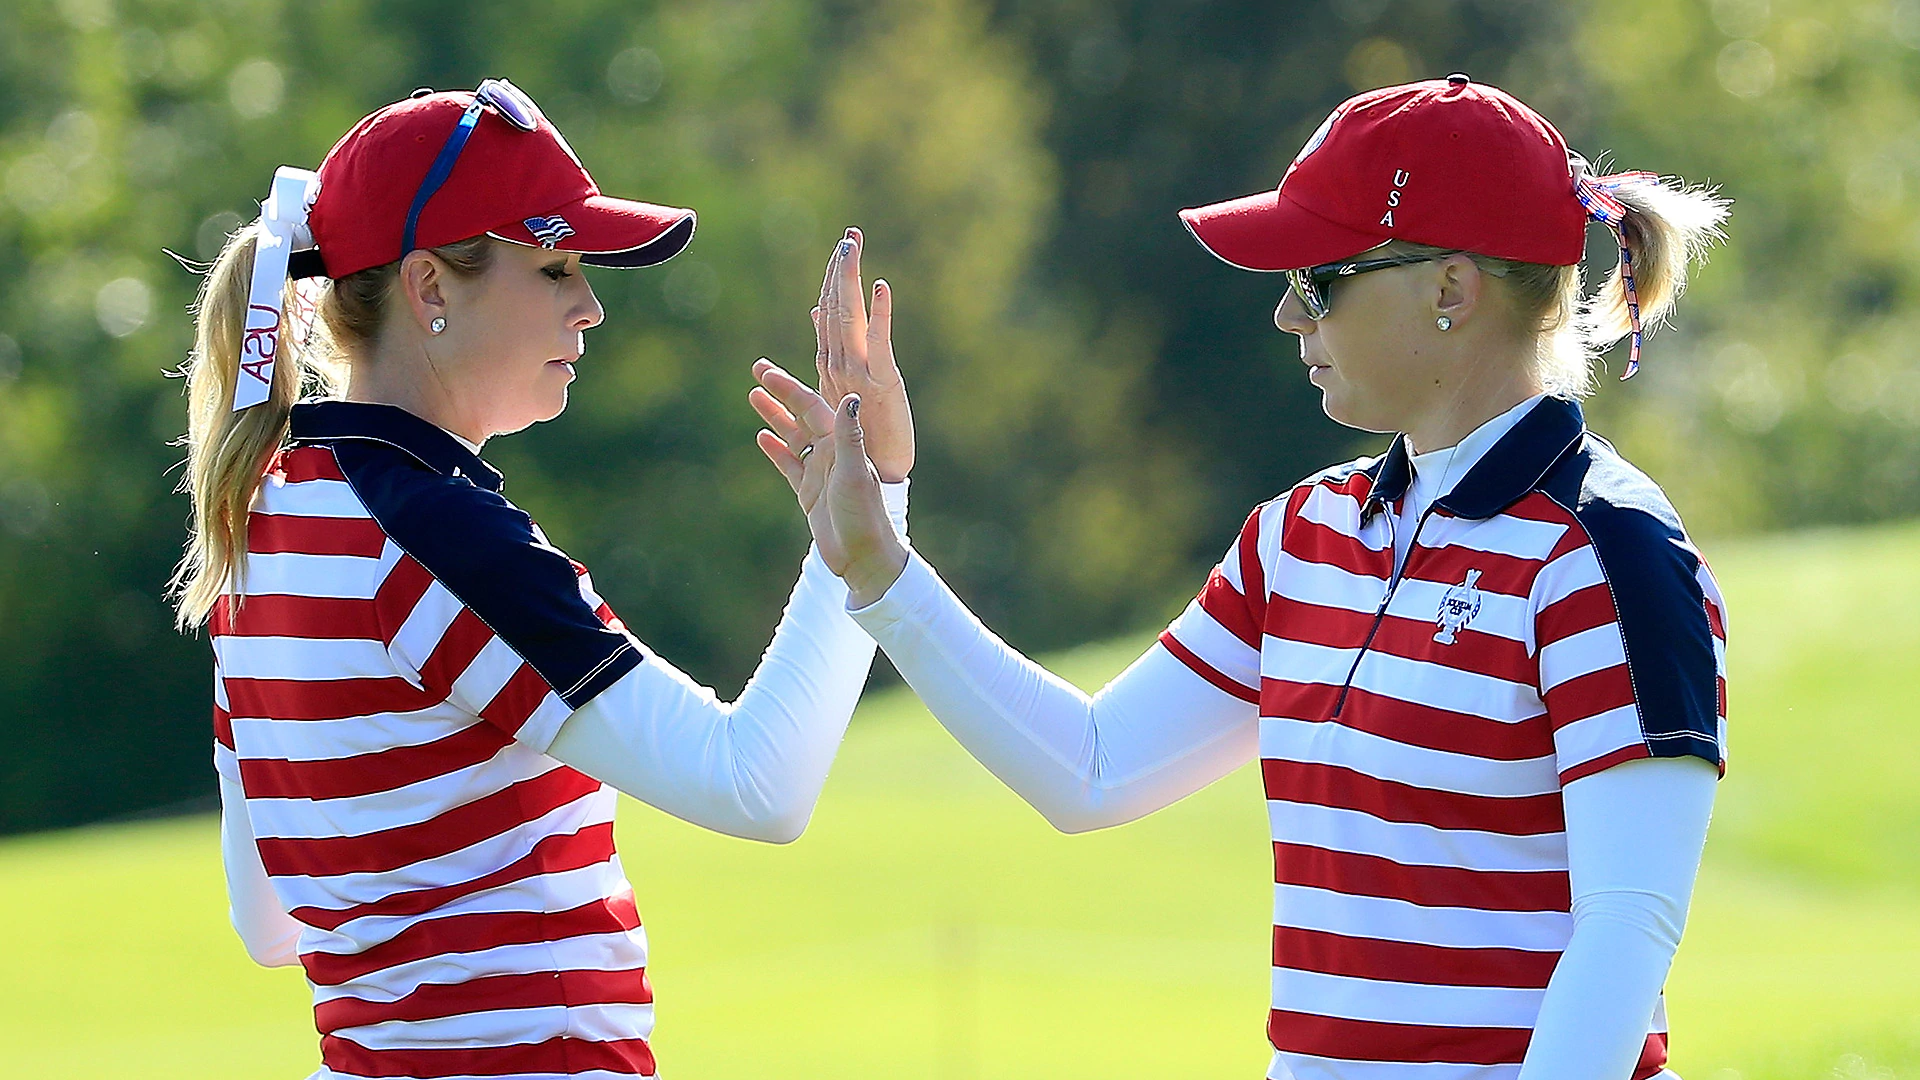 Inkster: Pressel, Creamer 'haven't shown me anything'